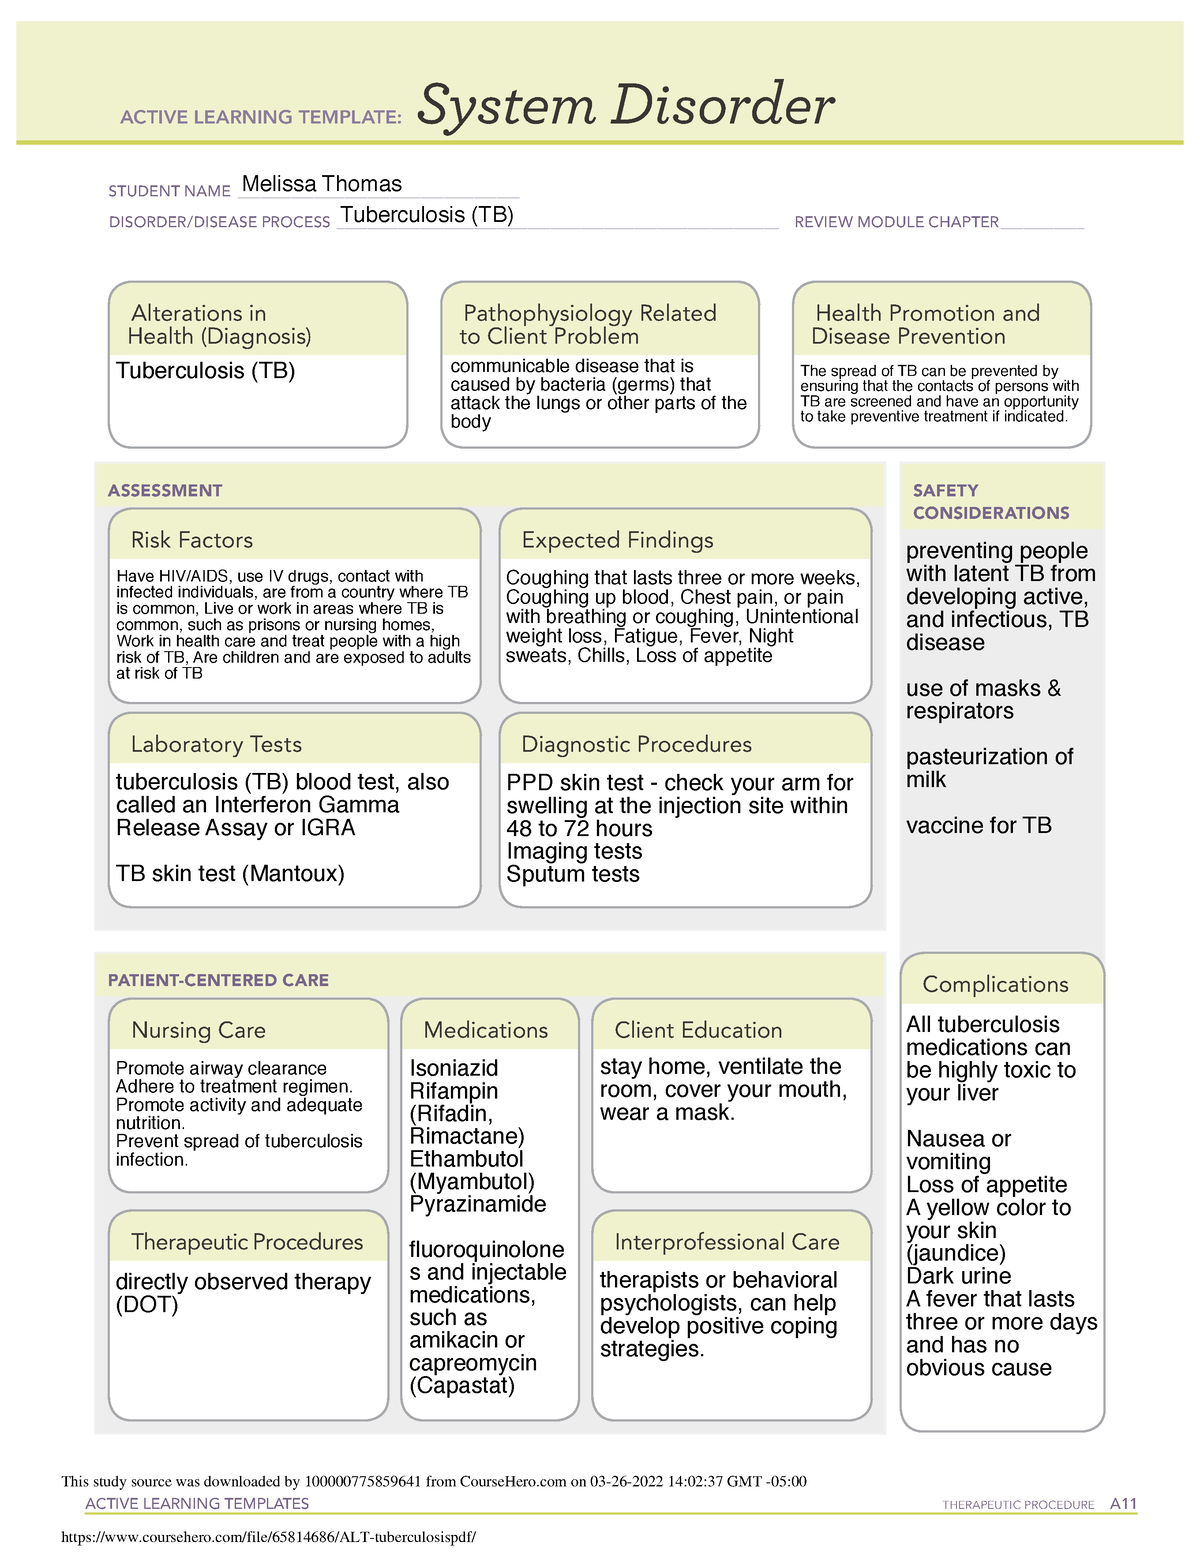 ALT tuberculosis active learning template ACTIVE LEARNING TEMPLATES